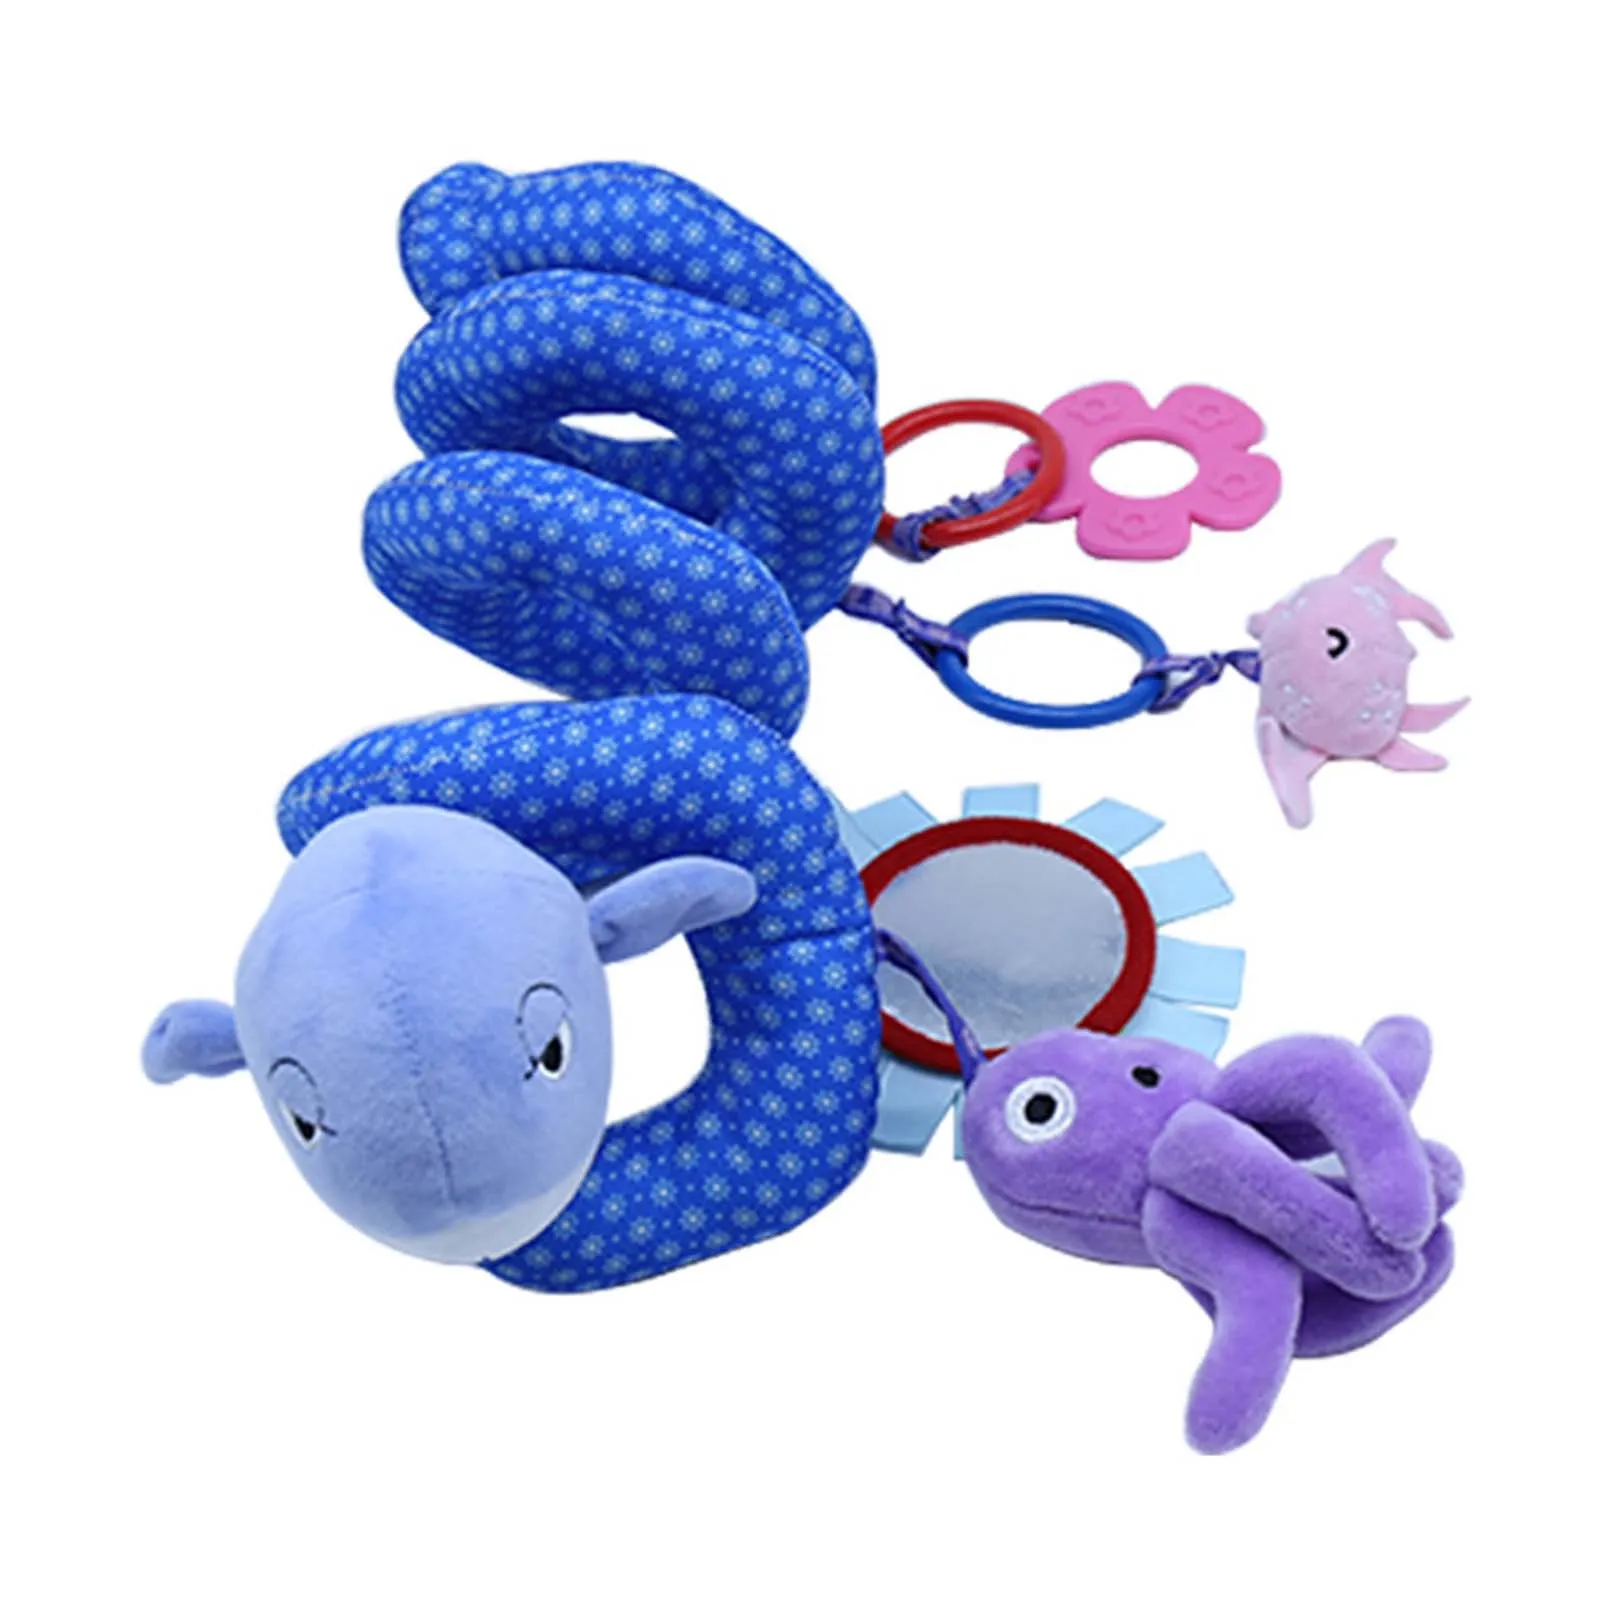 

Spiral Stroller Activity Toy Cute Shape Design Spiral Plush Toys Unique Design Bed Around Rattle Toy Great Gift For 3 Months